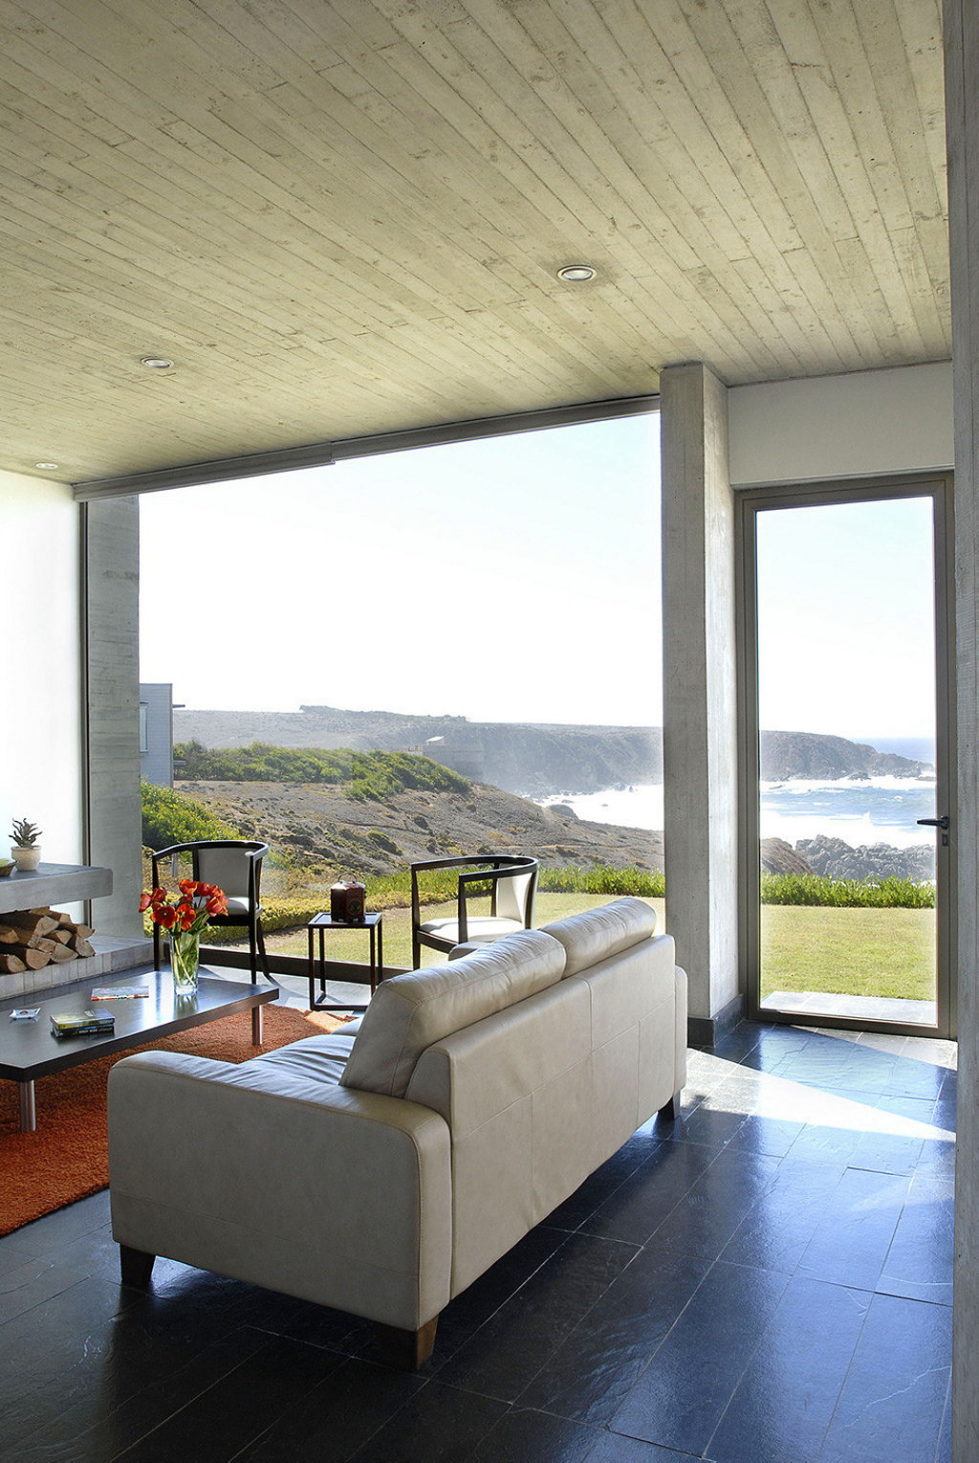 Rabanua Summer House From DX Arquitectos On The Coast of Chile 4